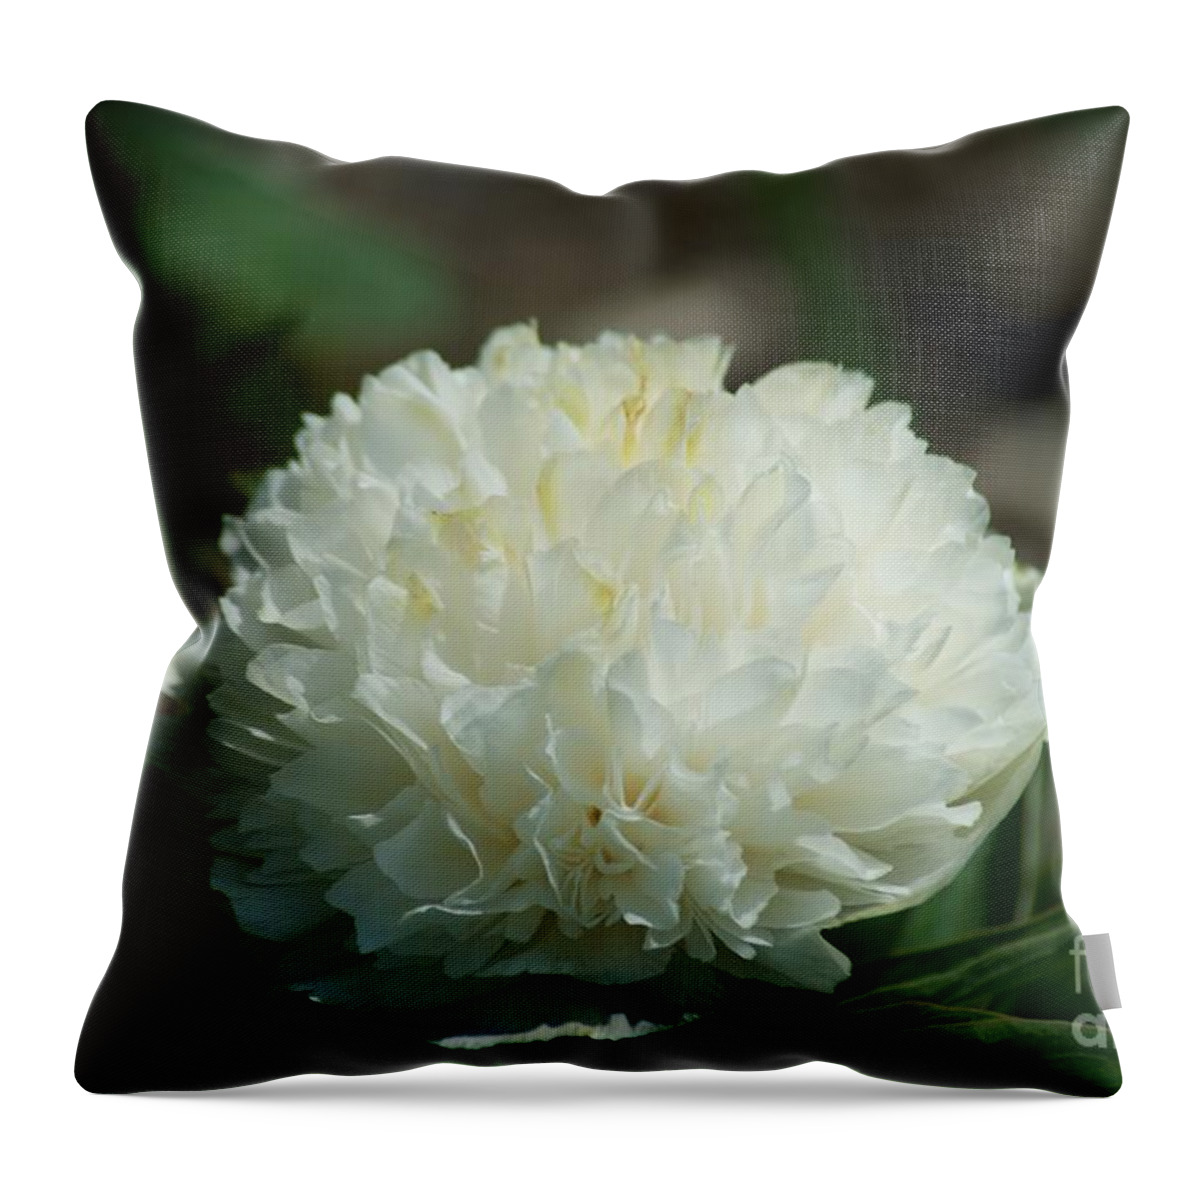 Flowers Throw Pillow featuring the photograph Potchen's Spring by Joseph Yarbrough